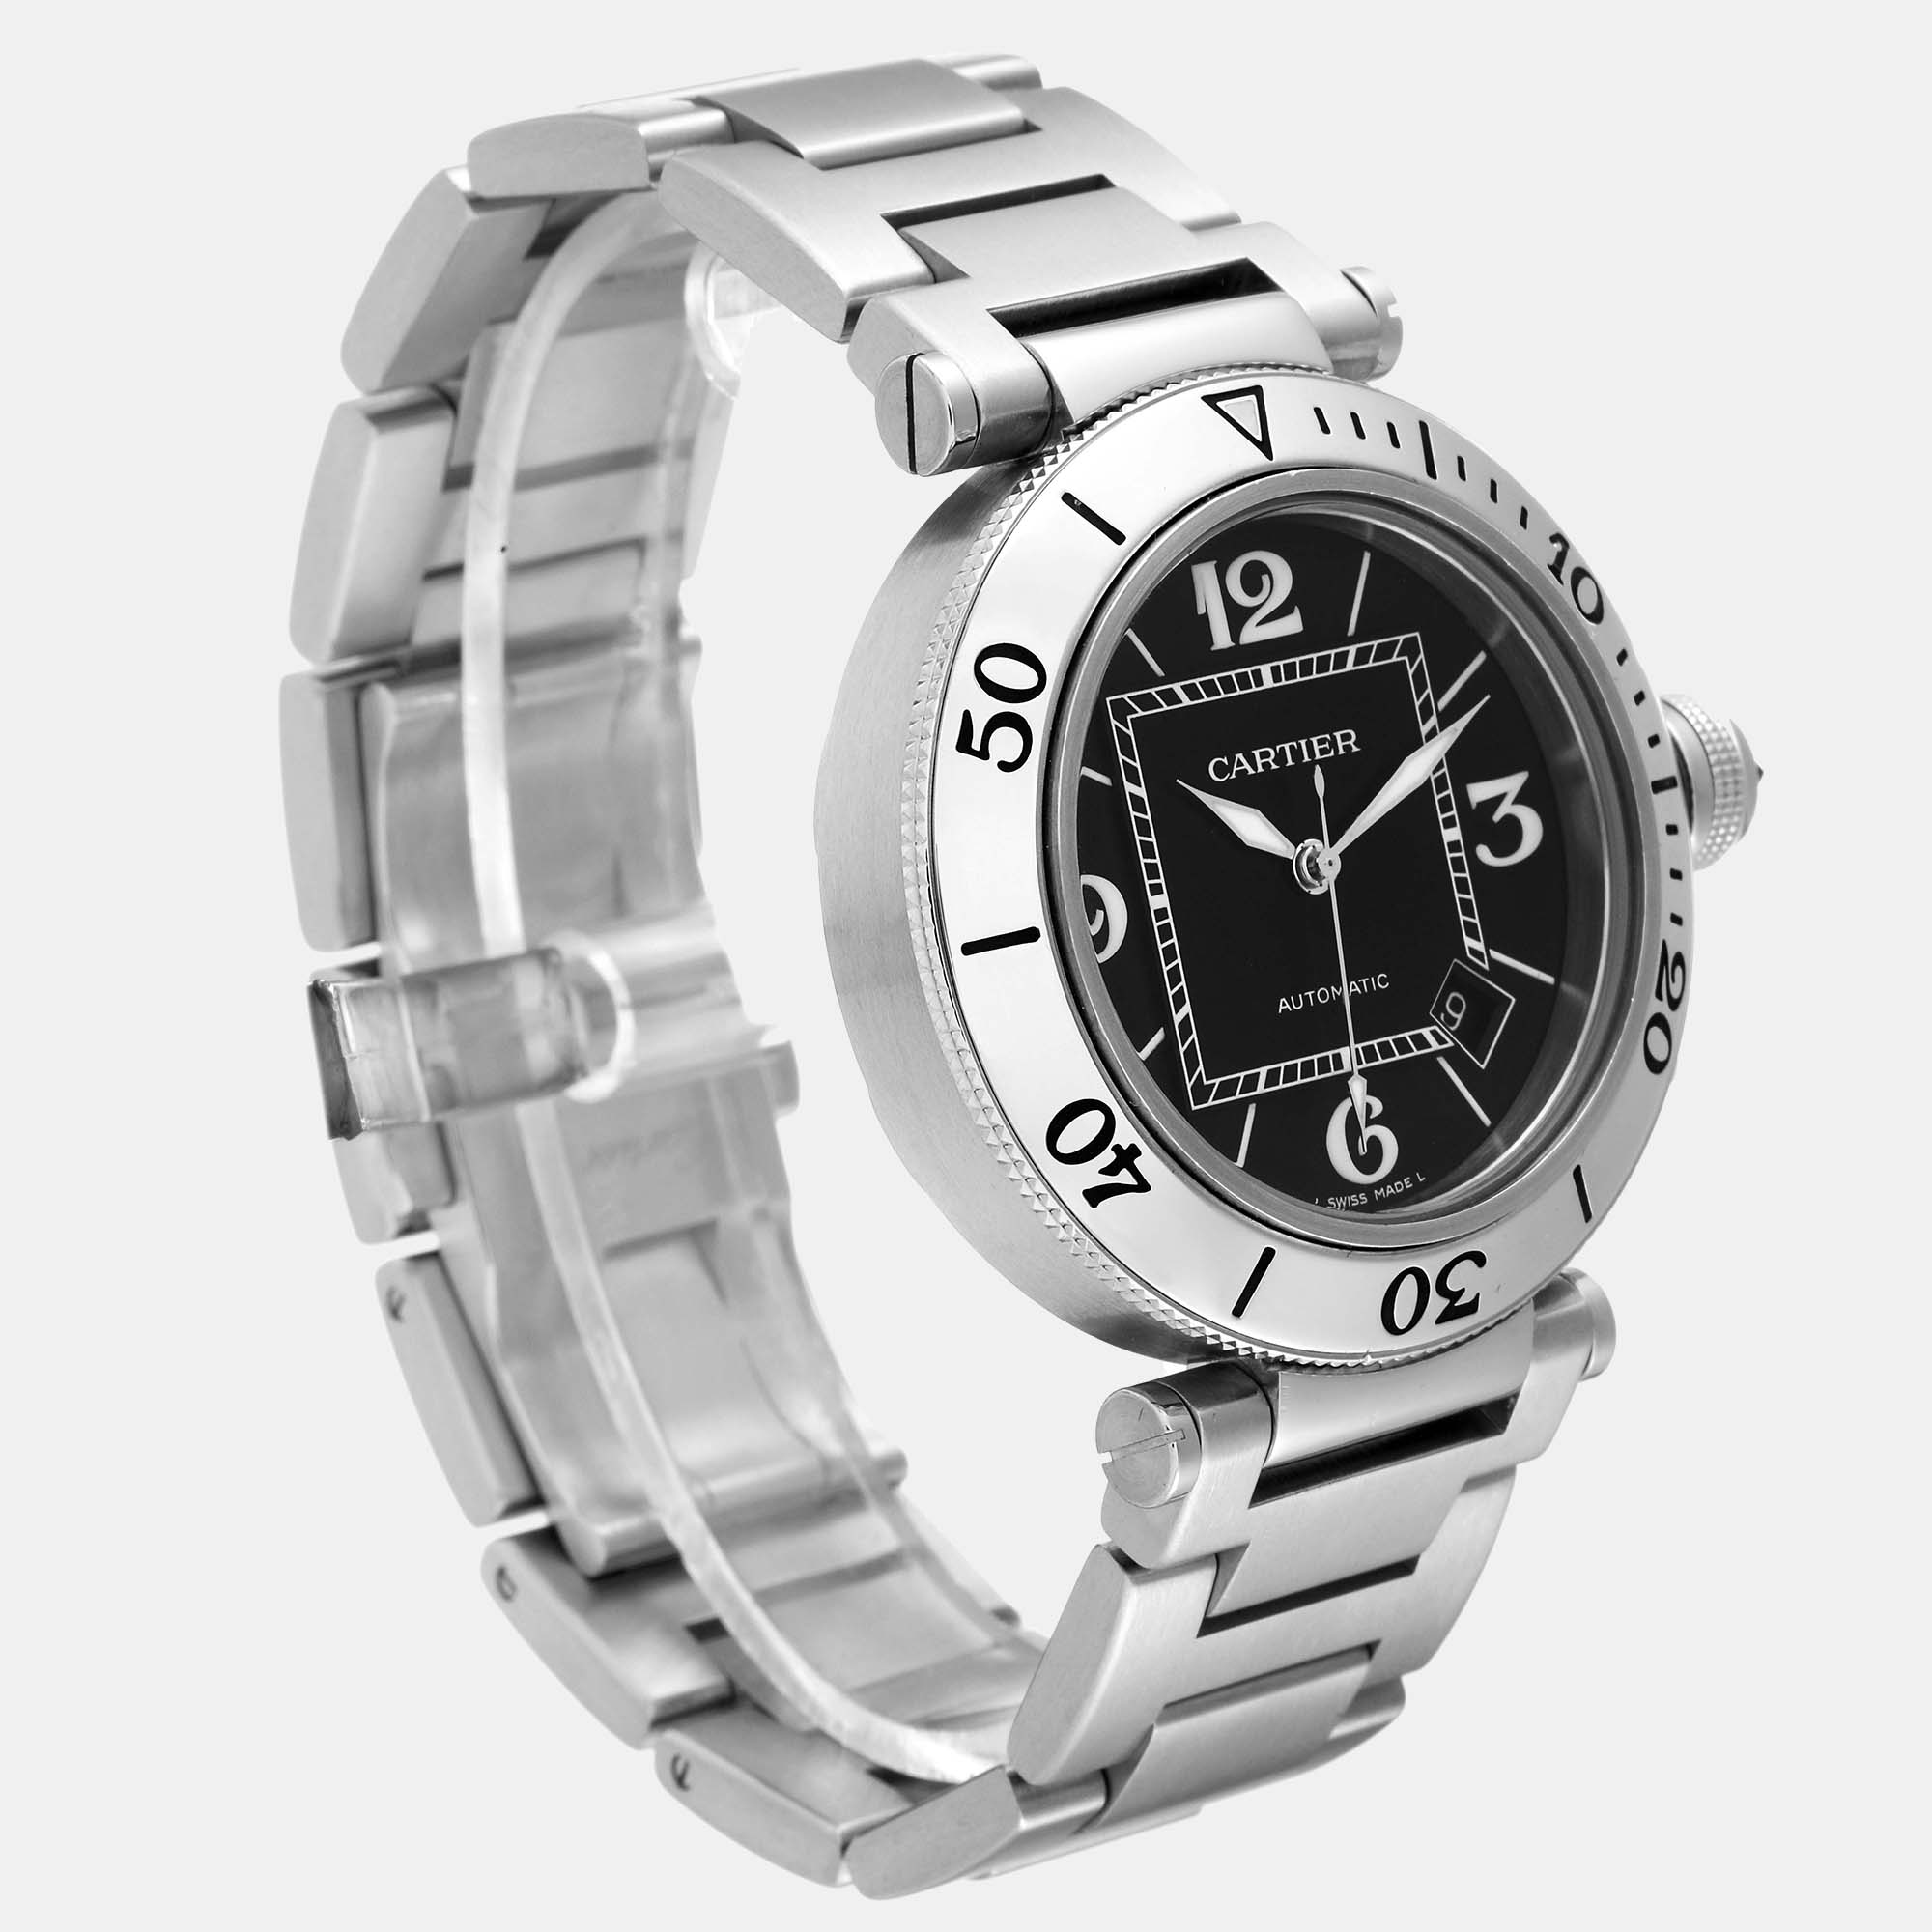 Cartier Pasha Seatimer Black Dial Automatic Steel Mens Watch W31077M7 40.5 Mm